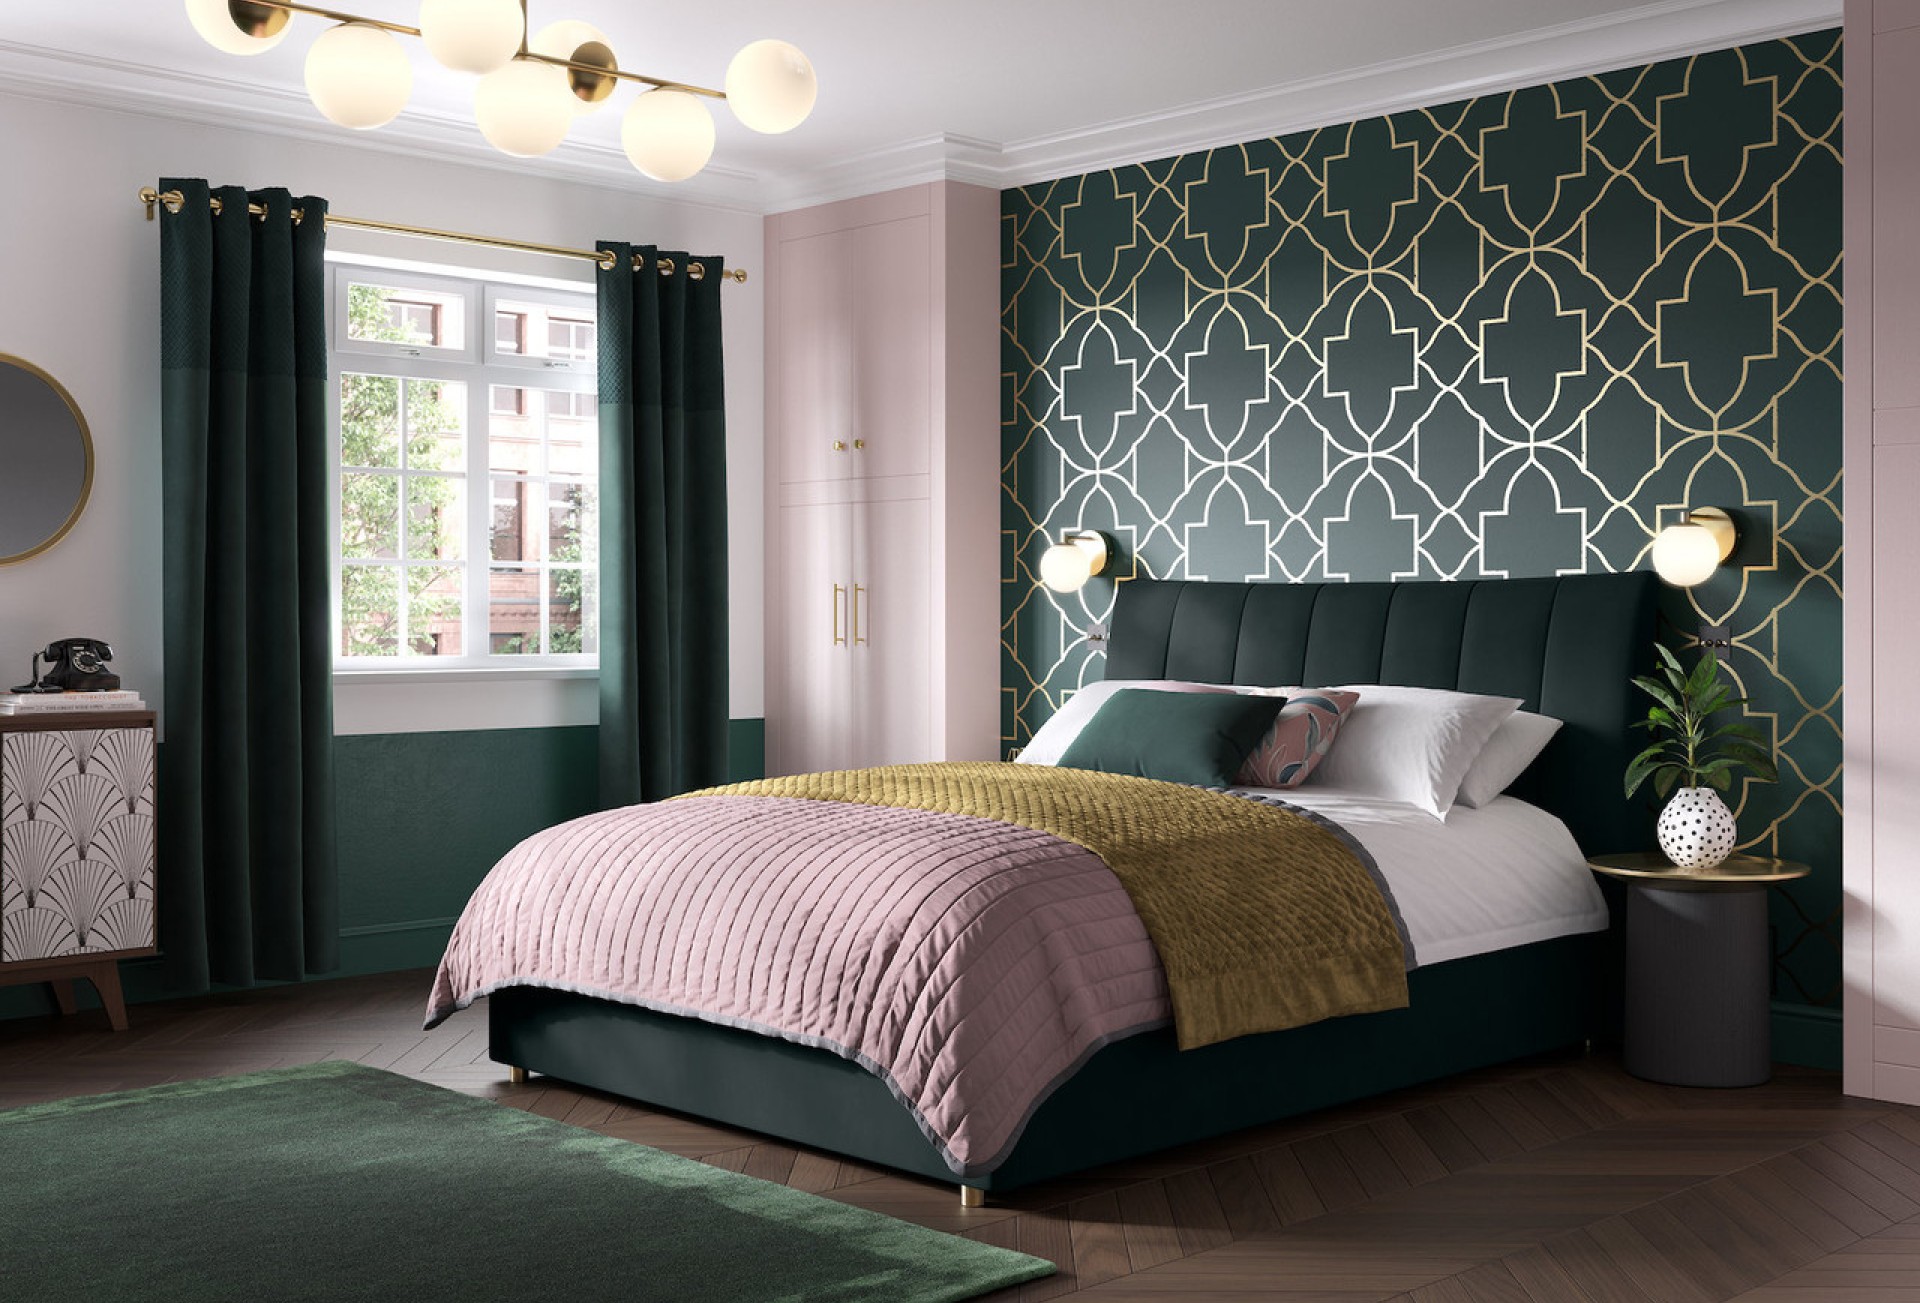 Bella upholstered ottoman storage bed frame in emerald green in an Art deco inspired bedroom